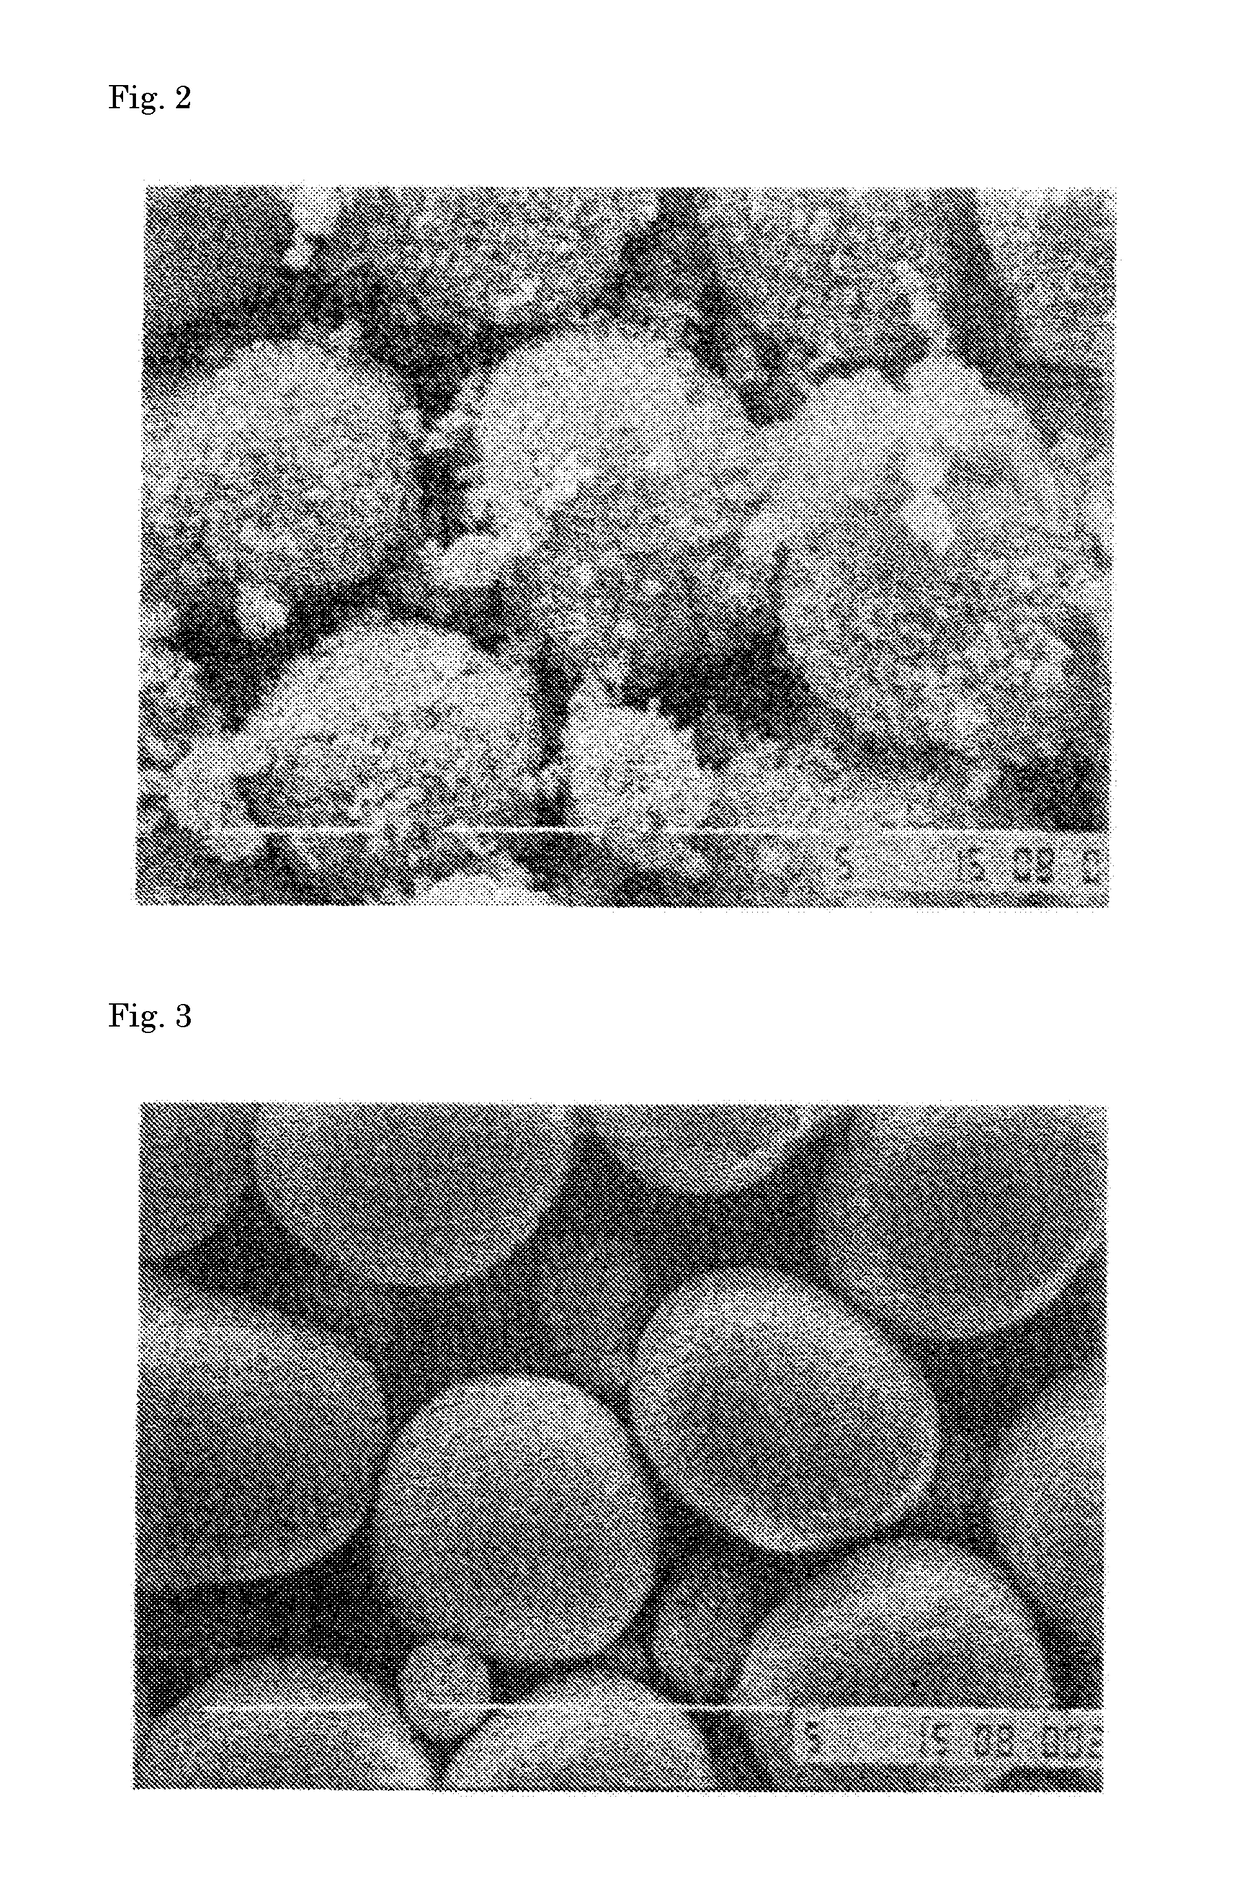 Positive active material for nonaqueous electrolyte secondary battery, method for producing same, electrode for nonaqueous electrolyte secondary battery, and nonaqueous electrolyte secondary battery